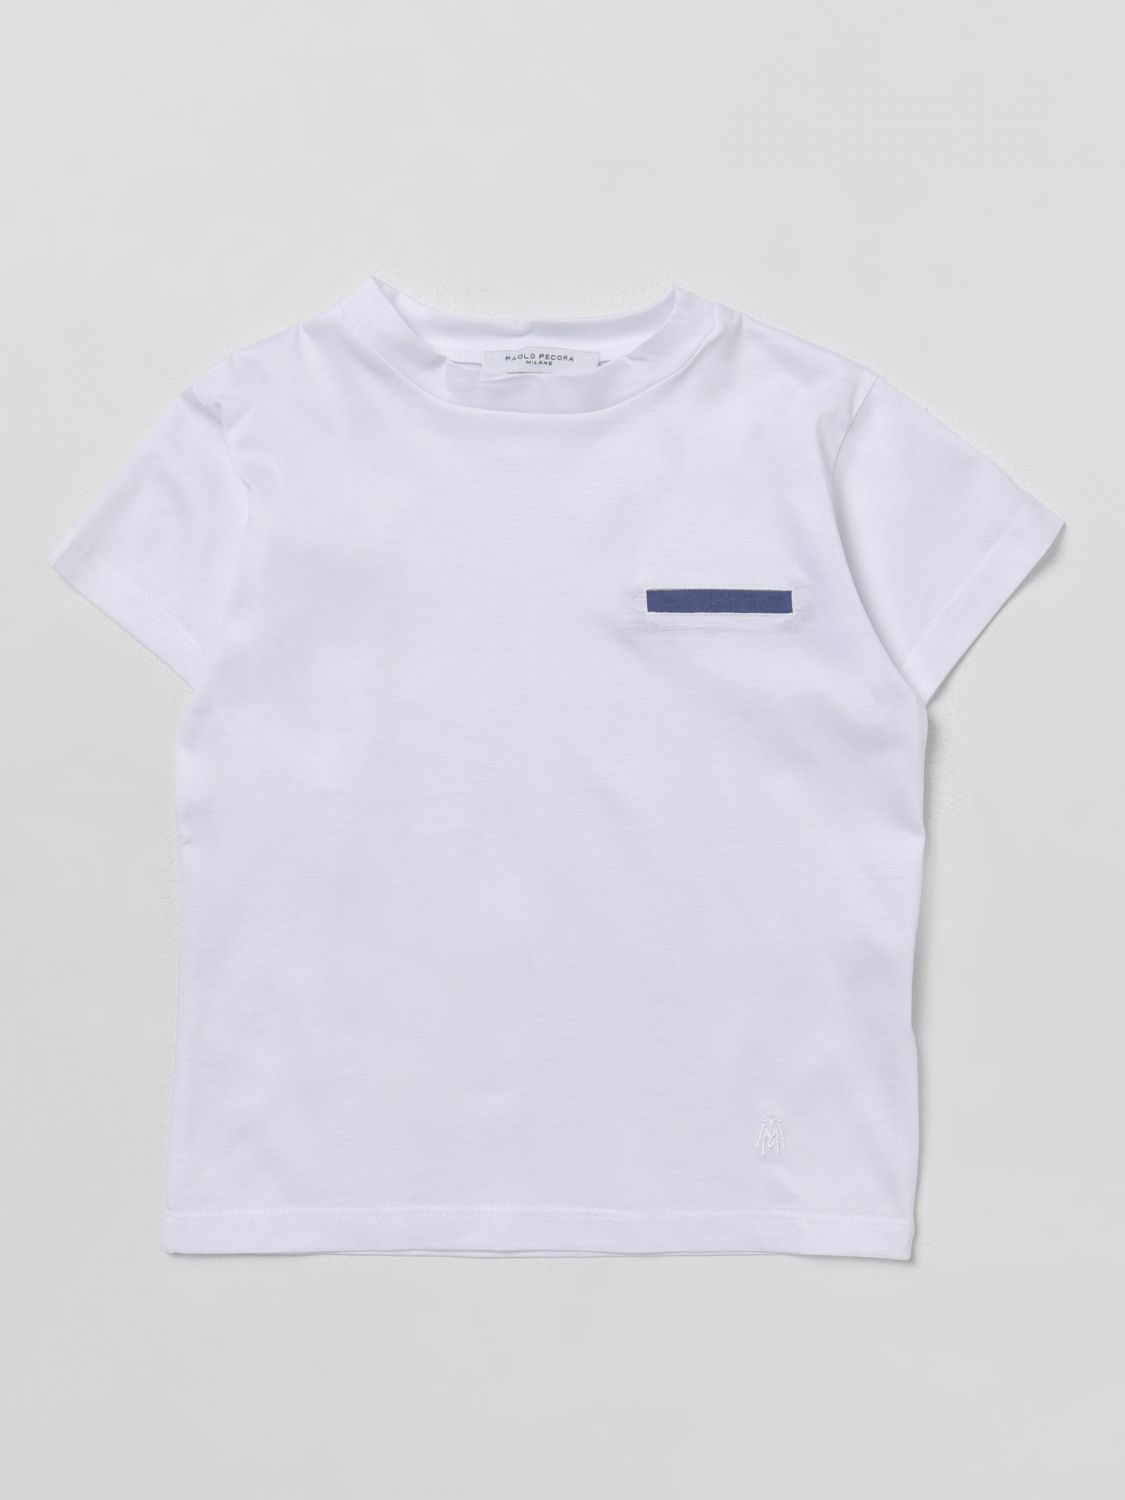 Paolo Pecora T-shirt  Kids Colour White In 白色